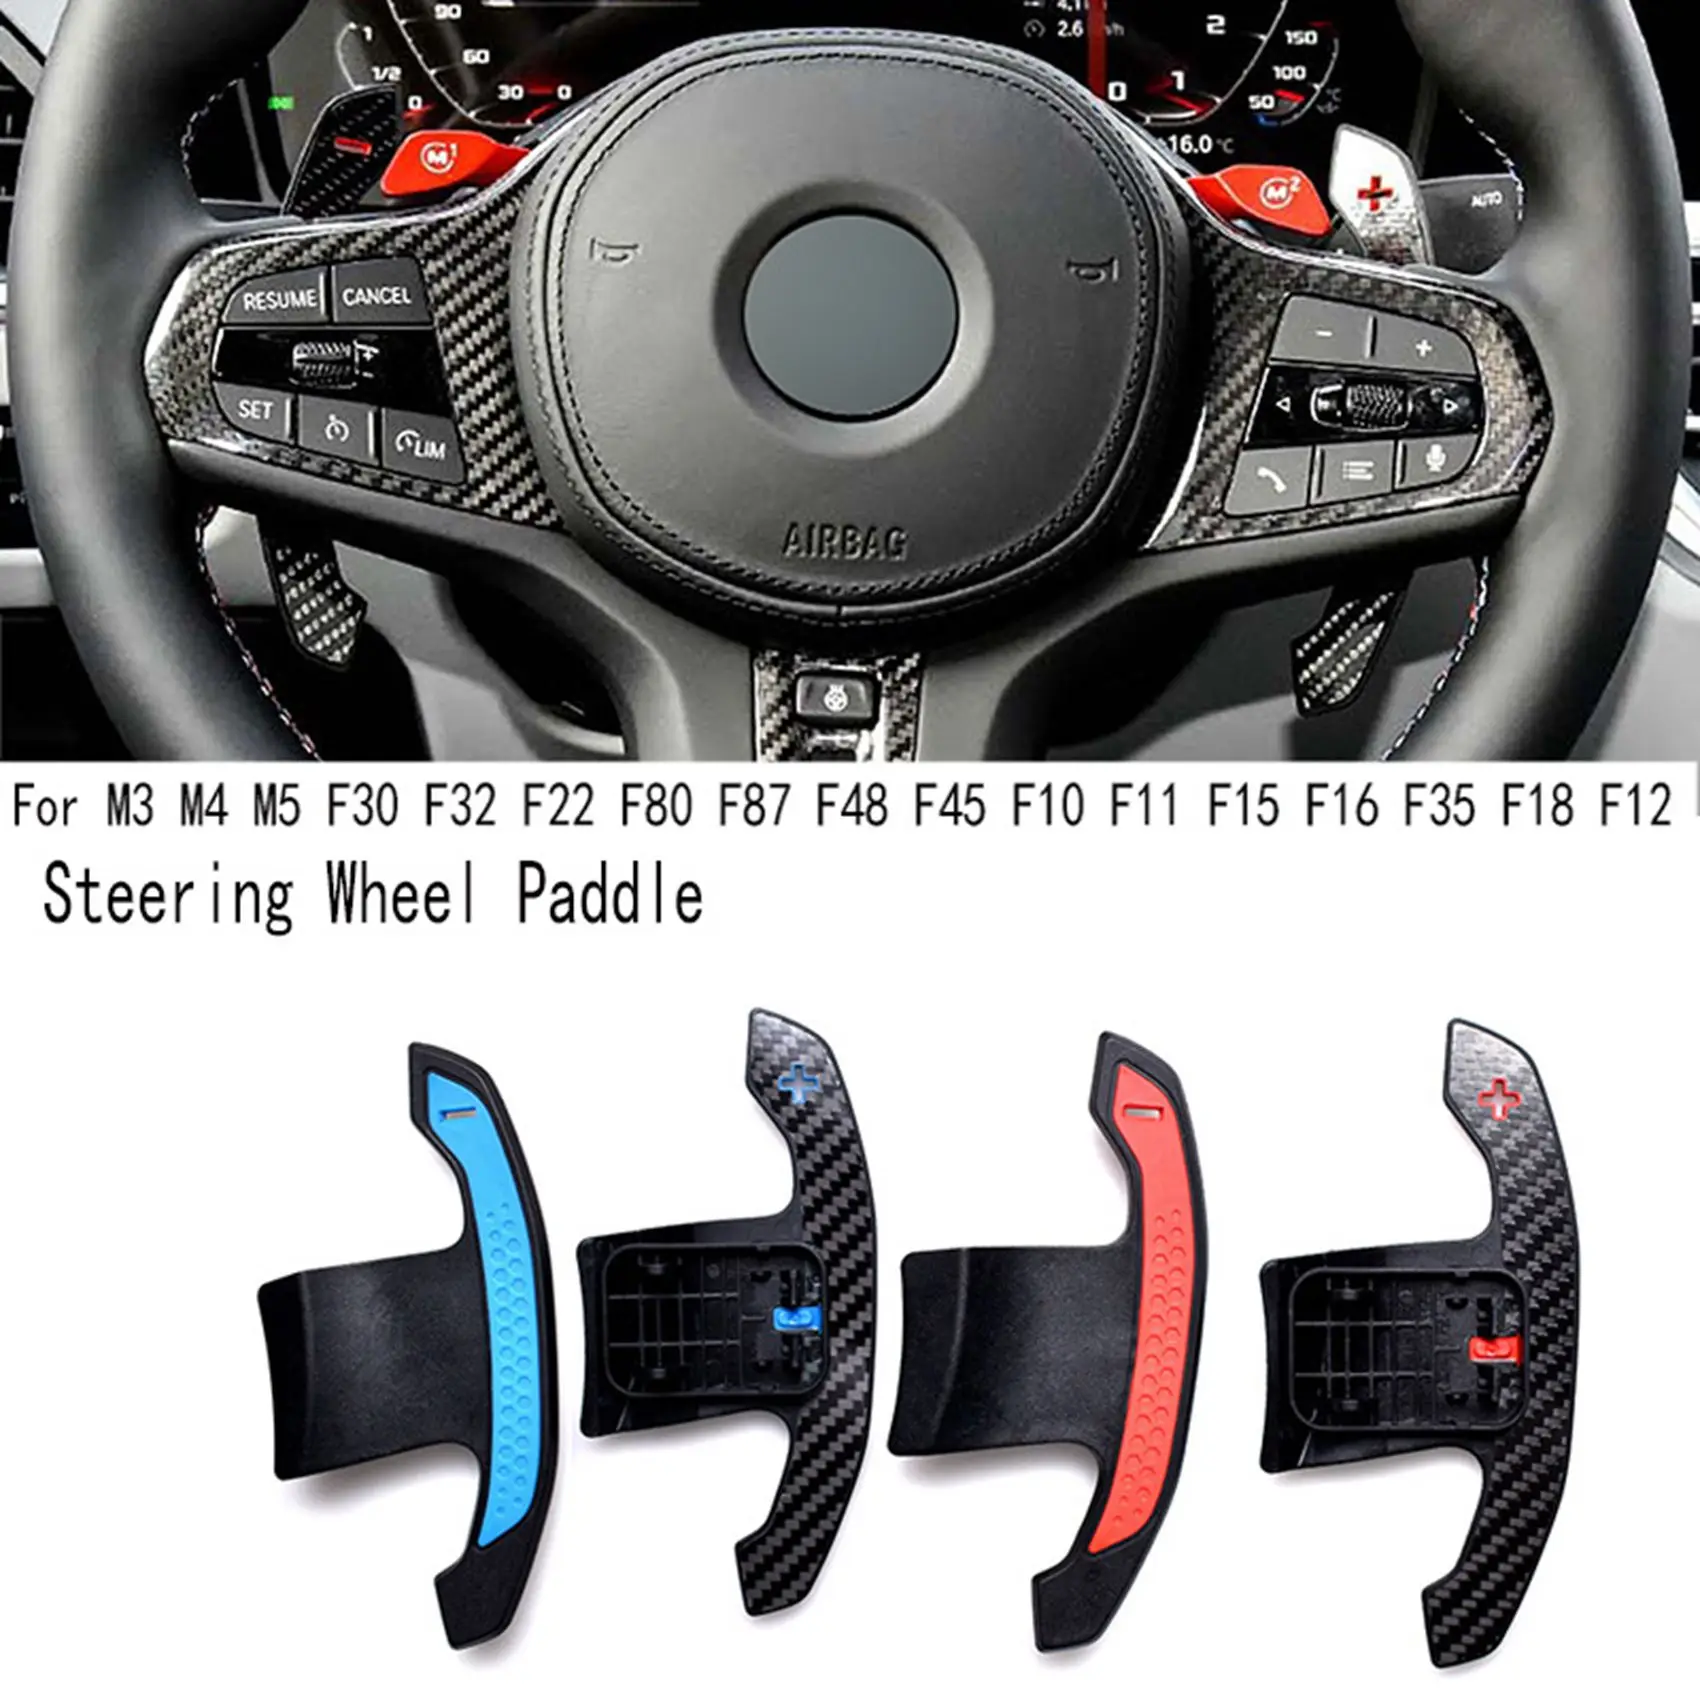 

Car Steering Wheel Paddle Extension Shifter for BMW M3 M4 M5 F30 F32 F22 F80 F87 F48 F45 F10 F11 F15 F16 F35 F18 Red